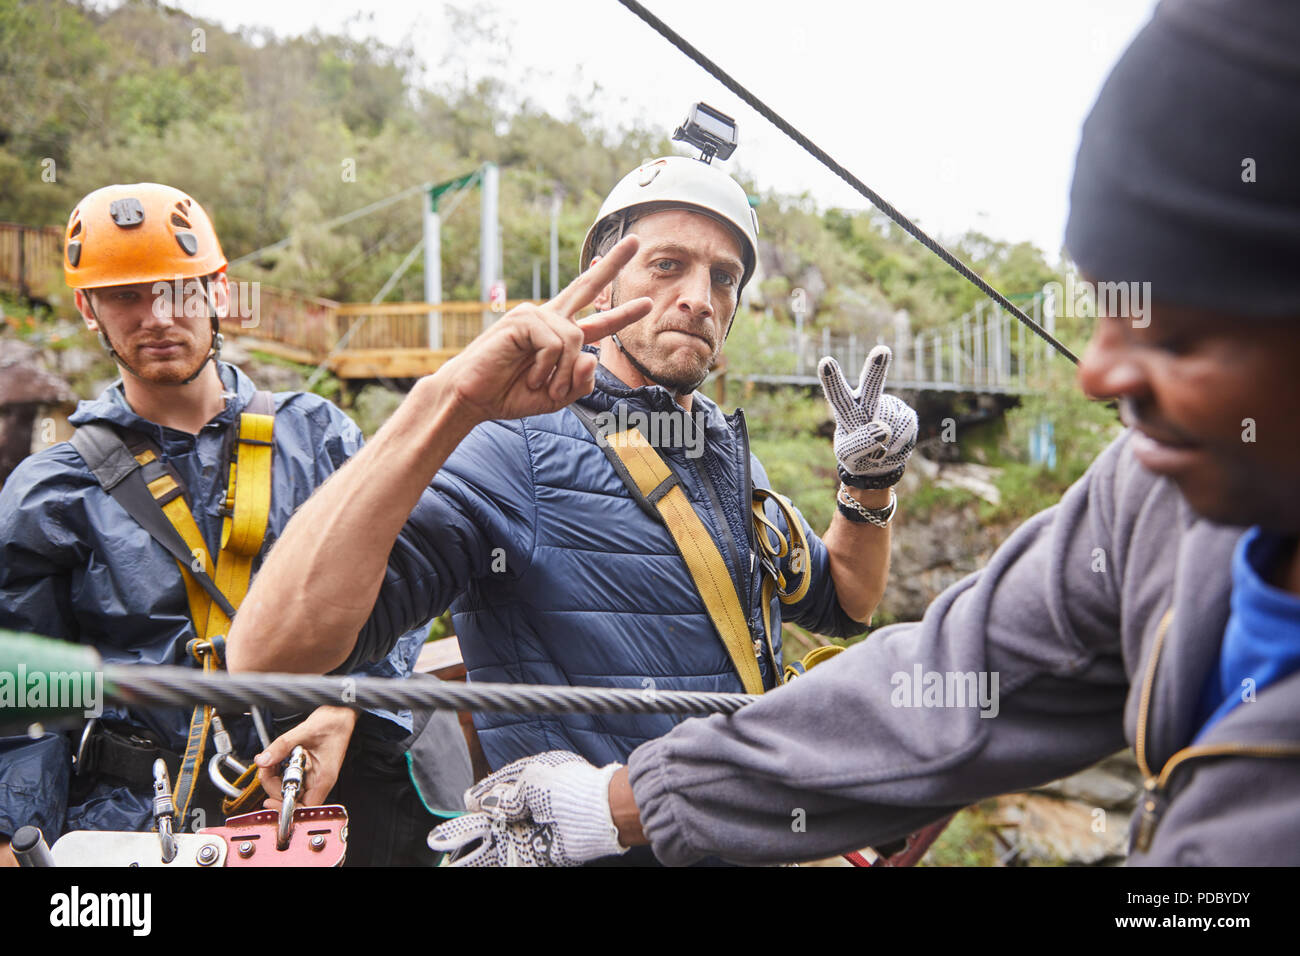 Portrait confident man with wearable camera preparing to zip line Stock Photo